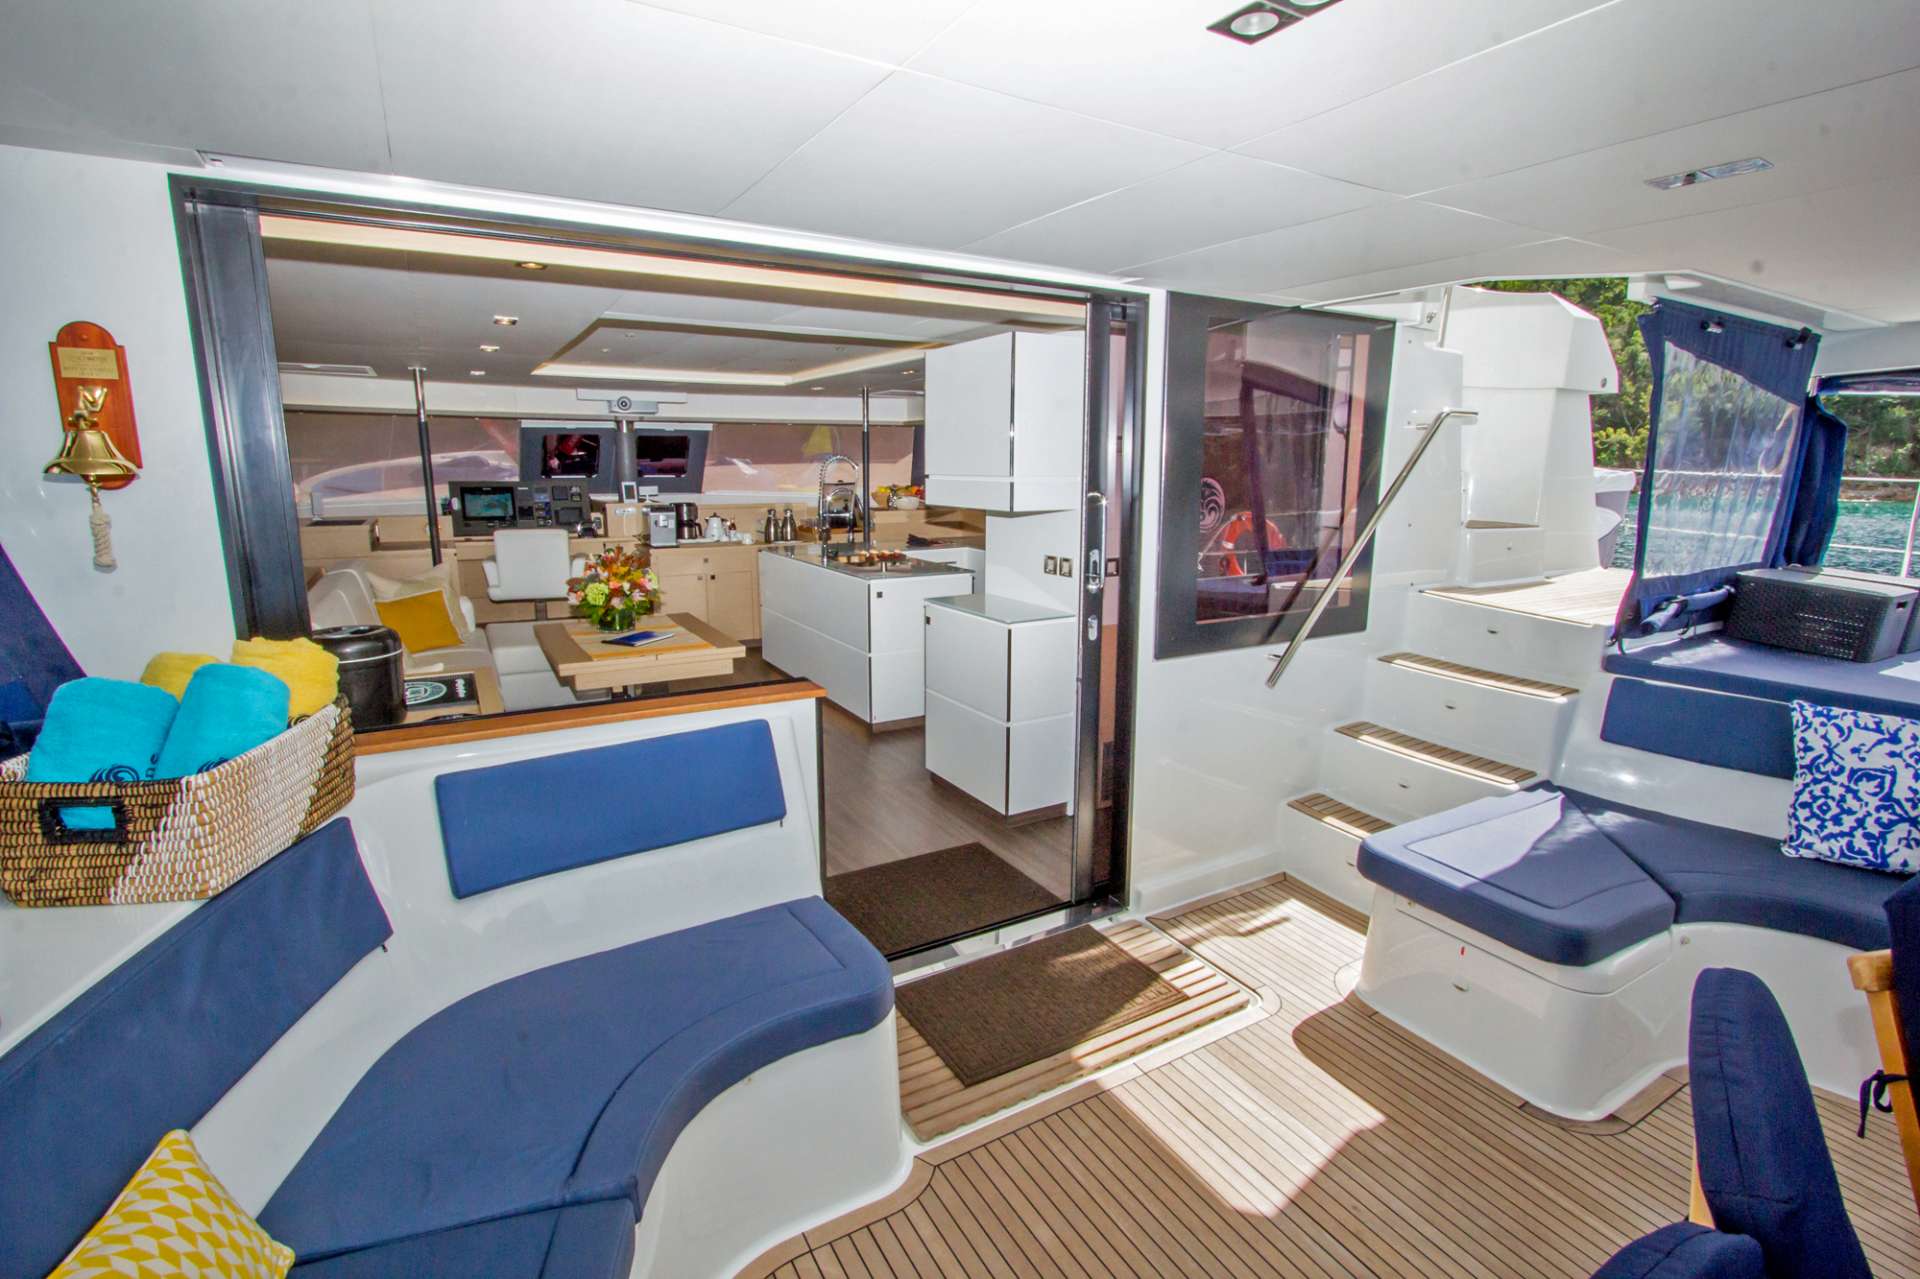 Catamaran Yacht 'NENNE' Spacious Aft Deck and Salon Entrance, 10 PAX, 3 Crew, 67.00 Ft, 20.00 Meters, Built 2017, Fountaine Pajot, Refit Year The latest, 2020 electronics and equipment onboard. New larger tender June 2019